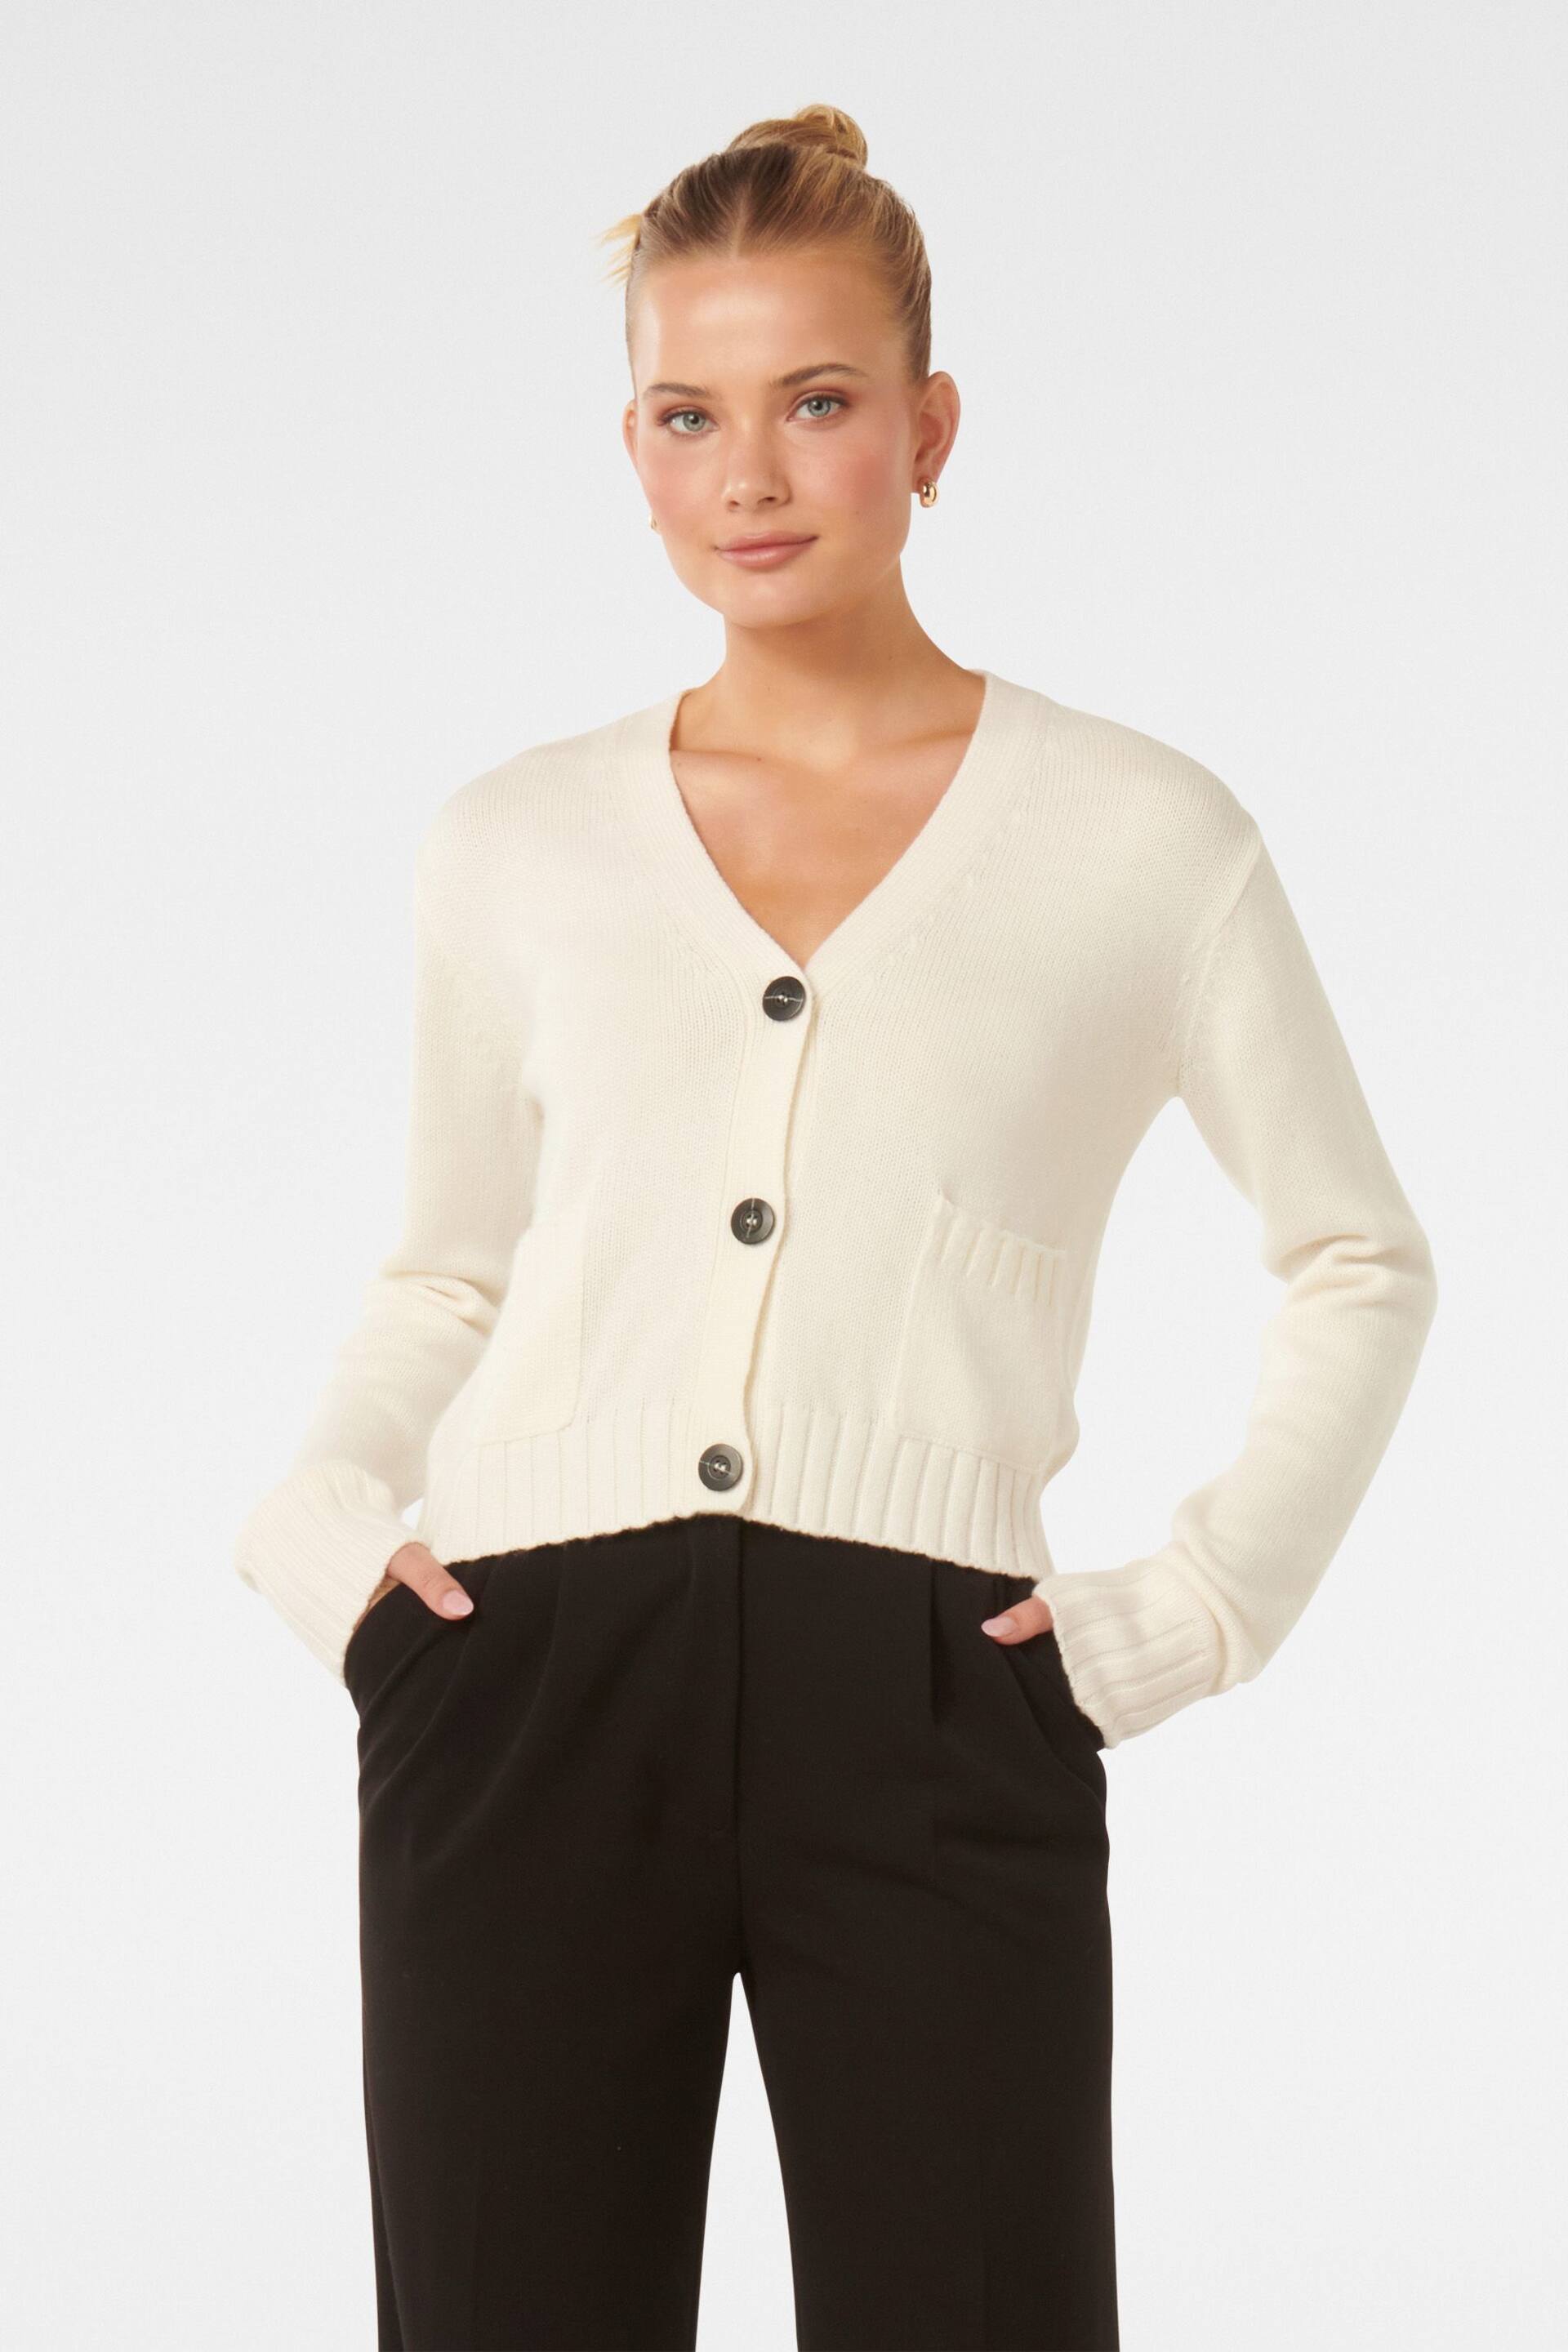 Forever New White Alice Button Through Cardigan - Image 1 of 5